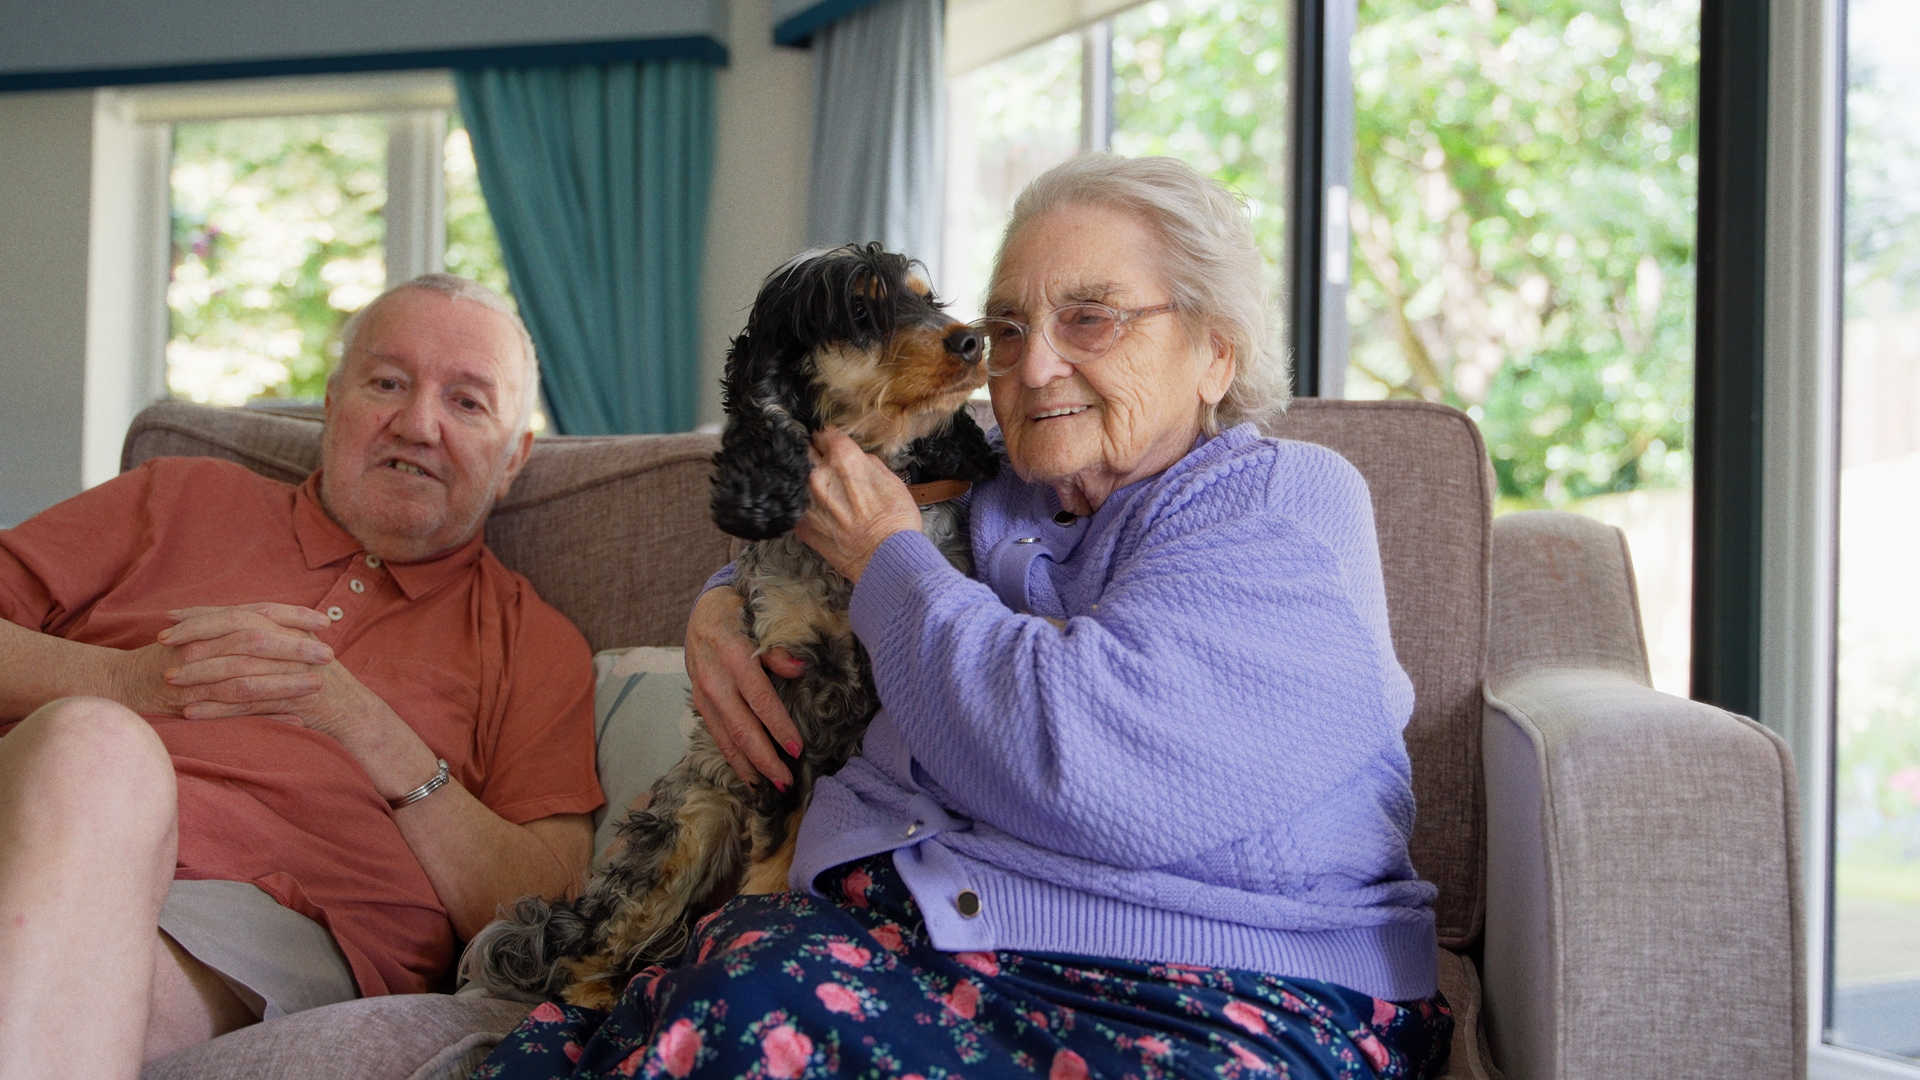 Residents at Chirk Court sitting on lounge sofa with therapy dog